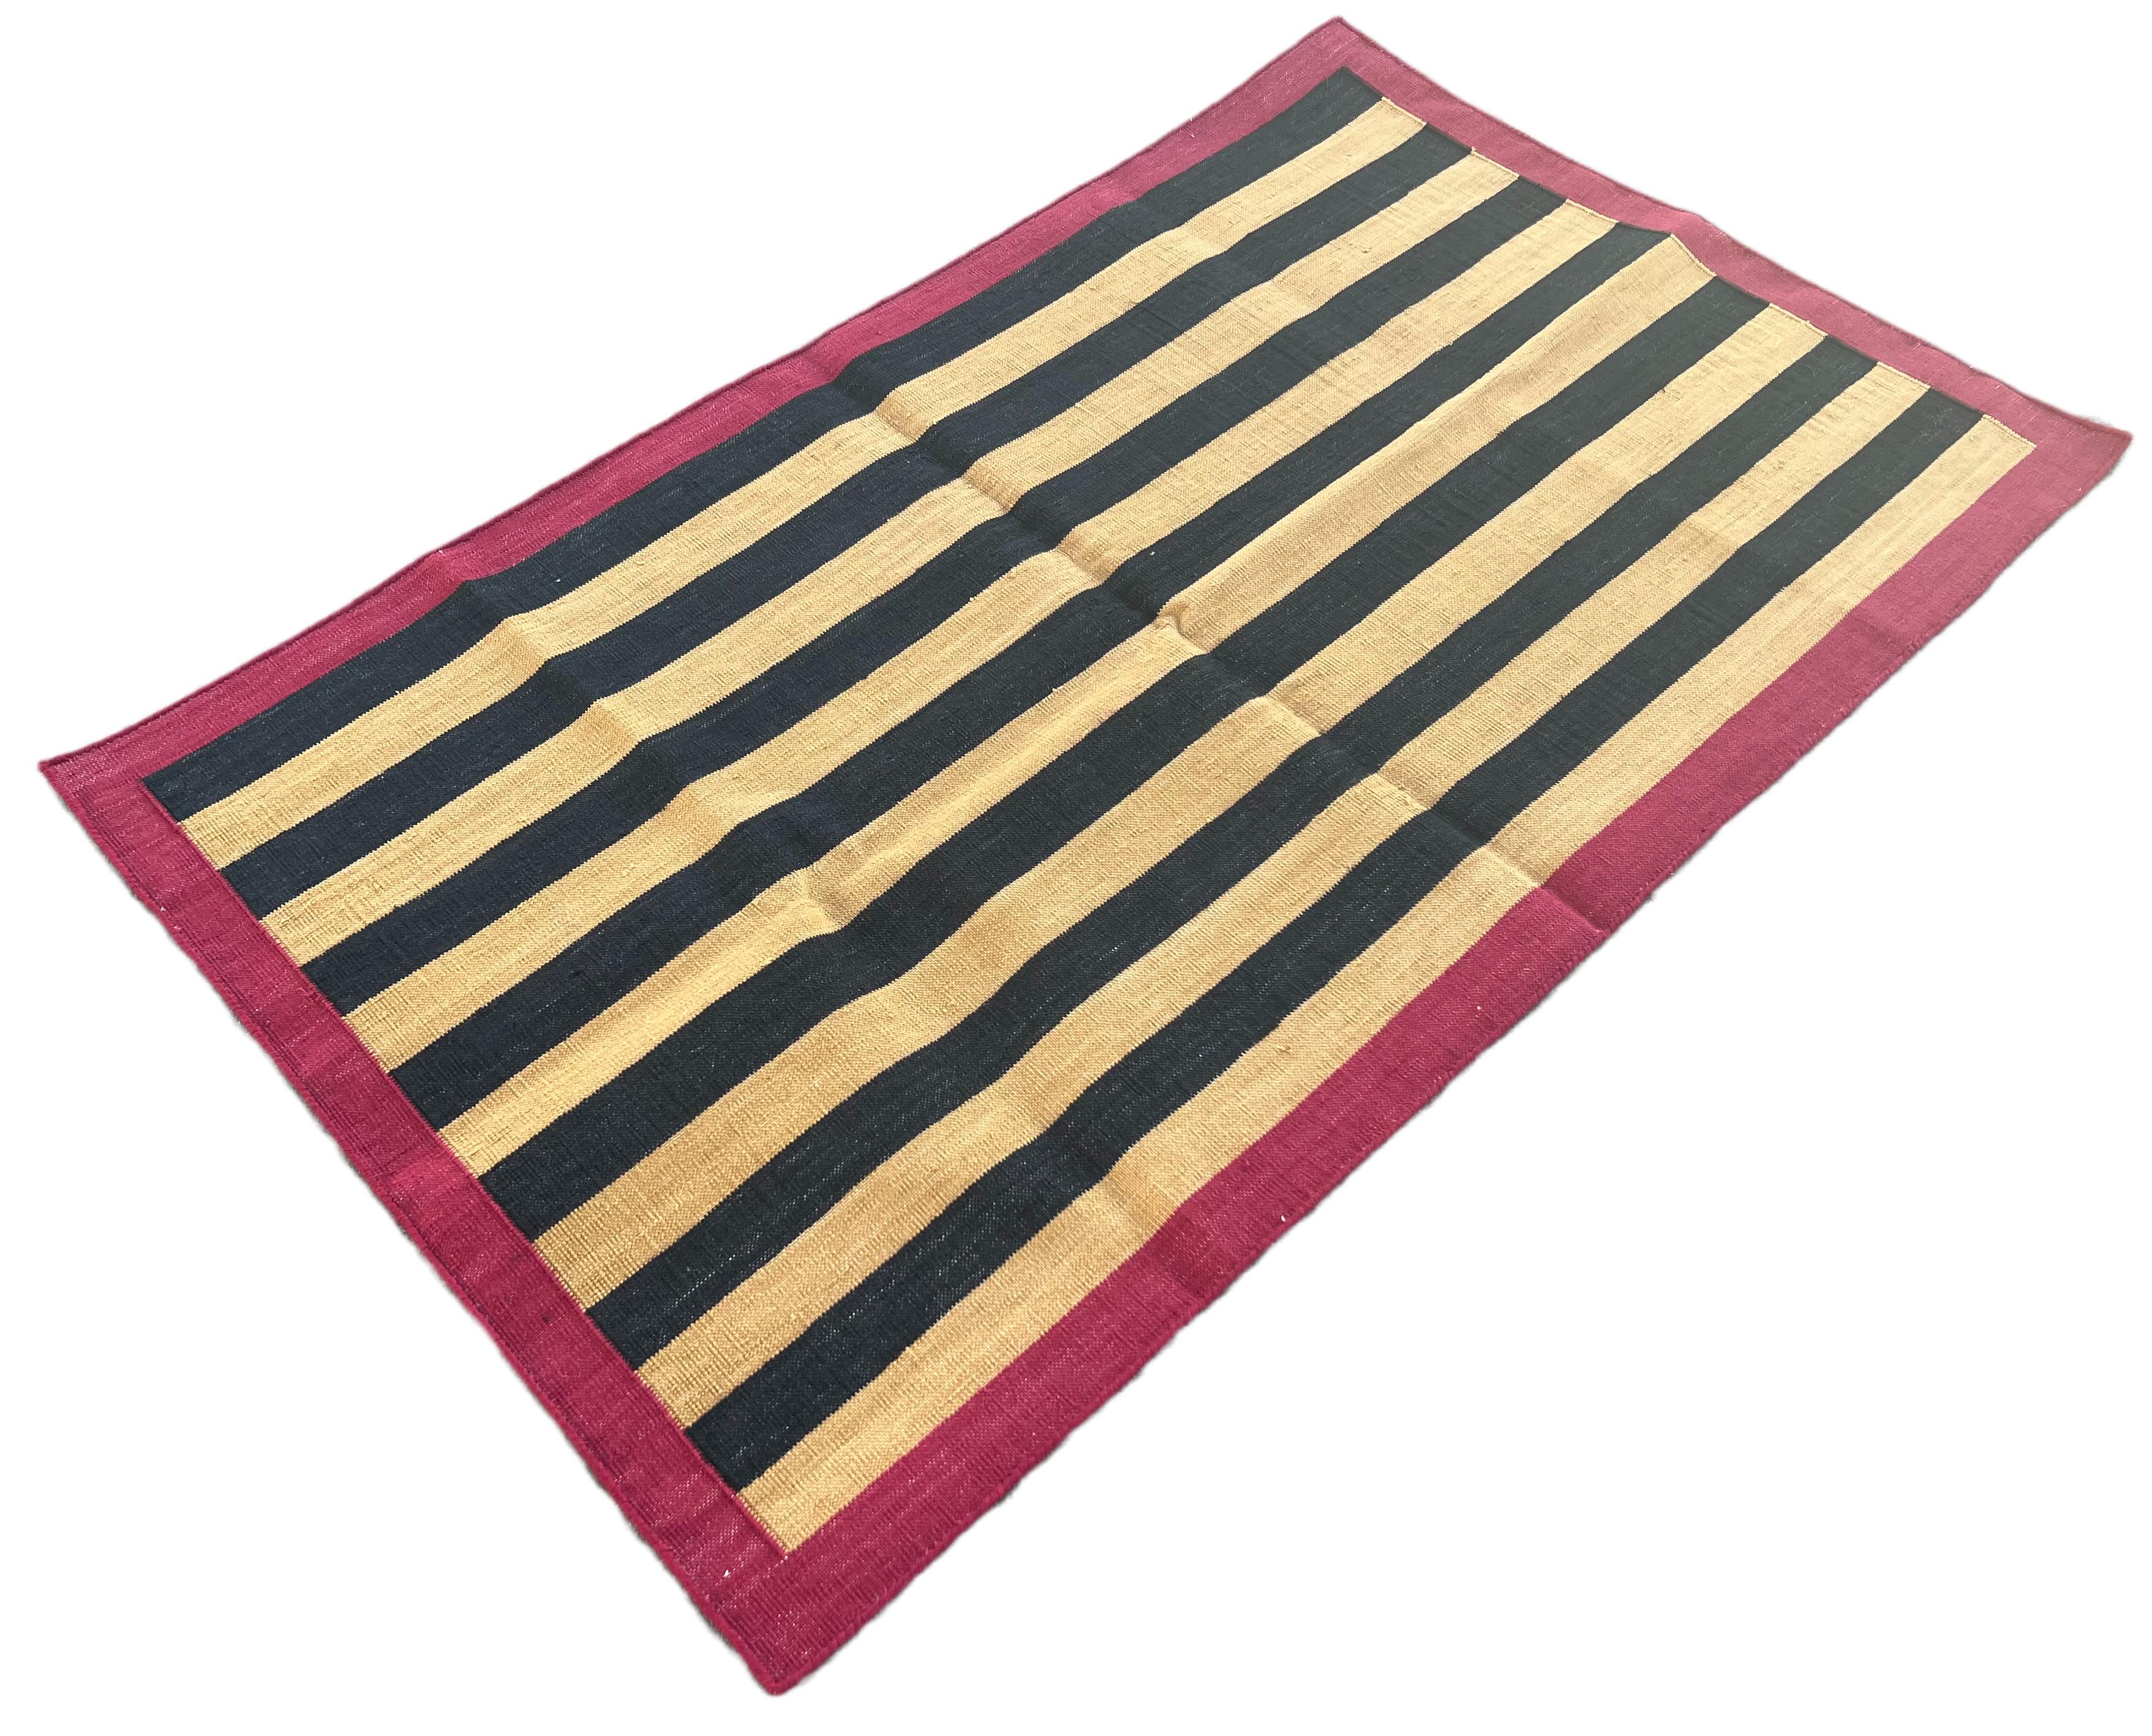 Hand-Woven Handmade Cotton Area Flat Weave Rug, 2.5x4 Yellow, Black Striped Indian Dhurrie For Sale